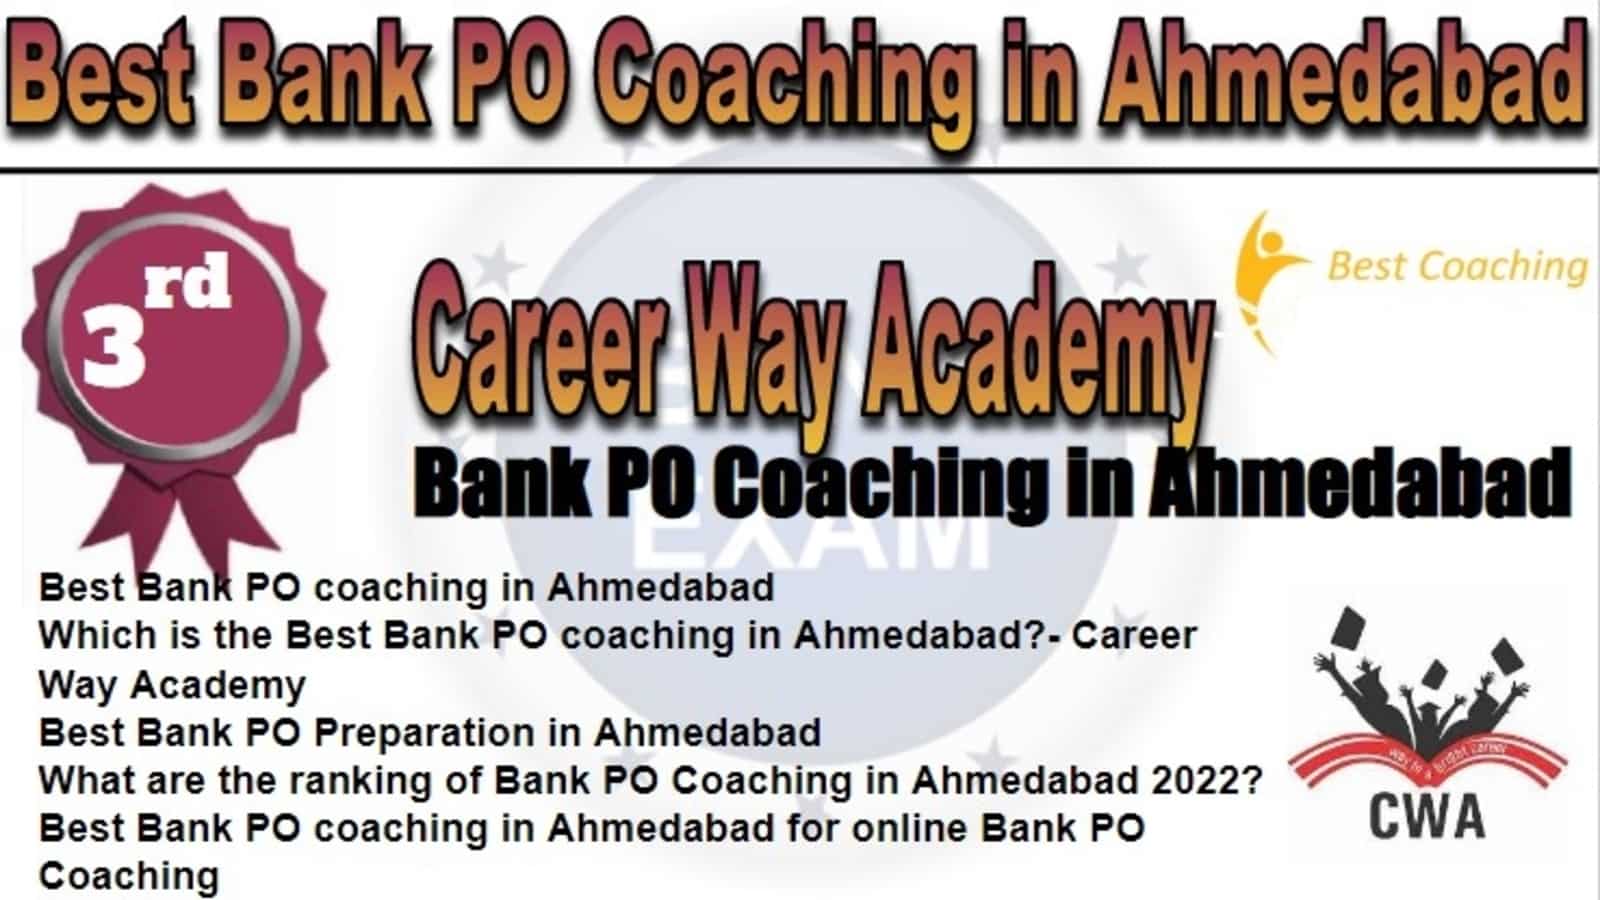 Rank 3 Best Bank PO Coaching in Ahmedabad